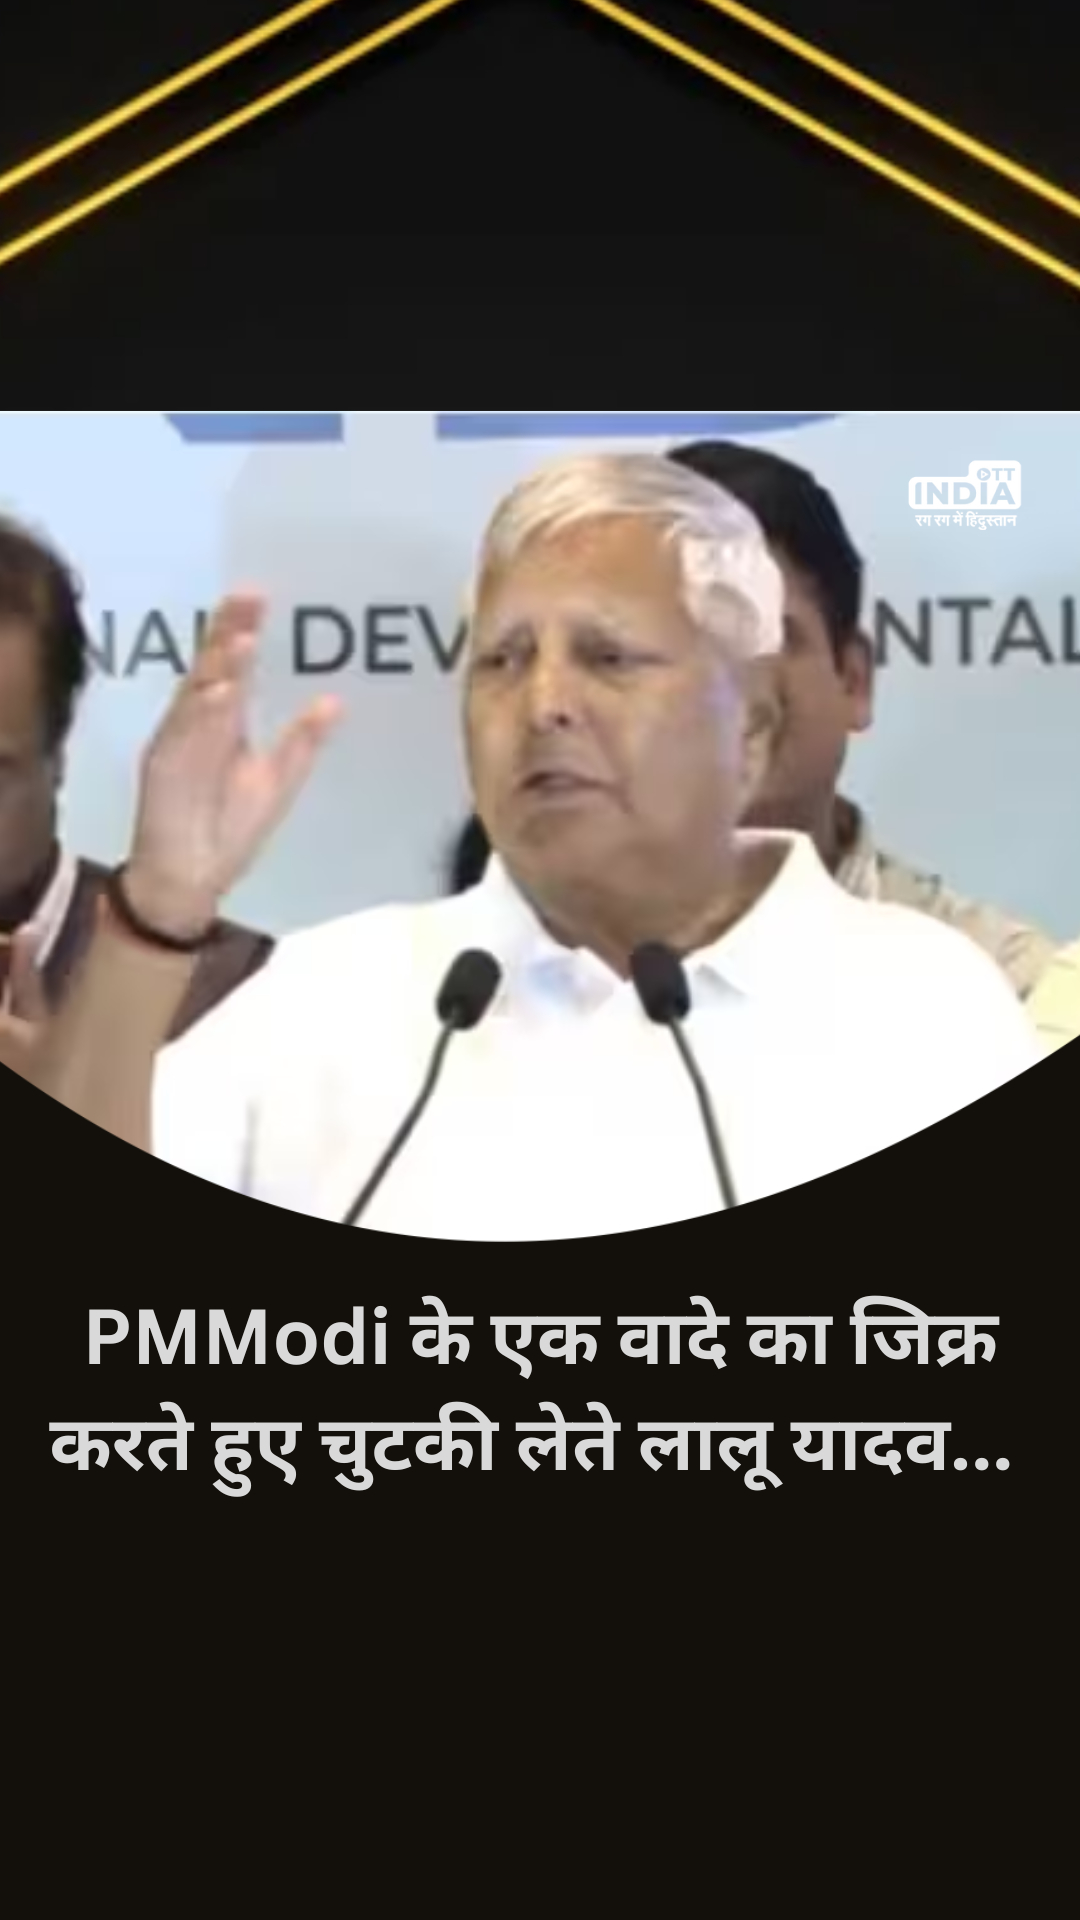 Lalu Yadav was seen making a joke while mentioning a promise of PM Modi...